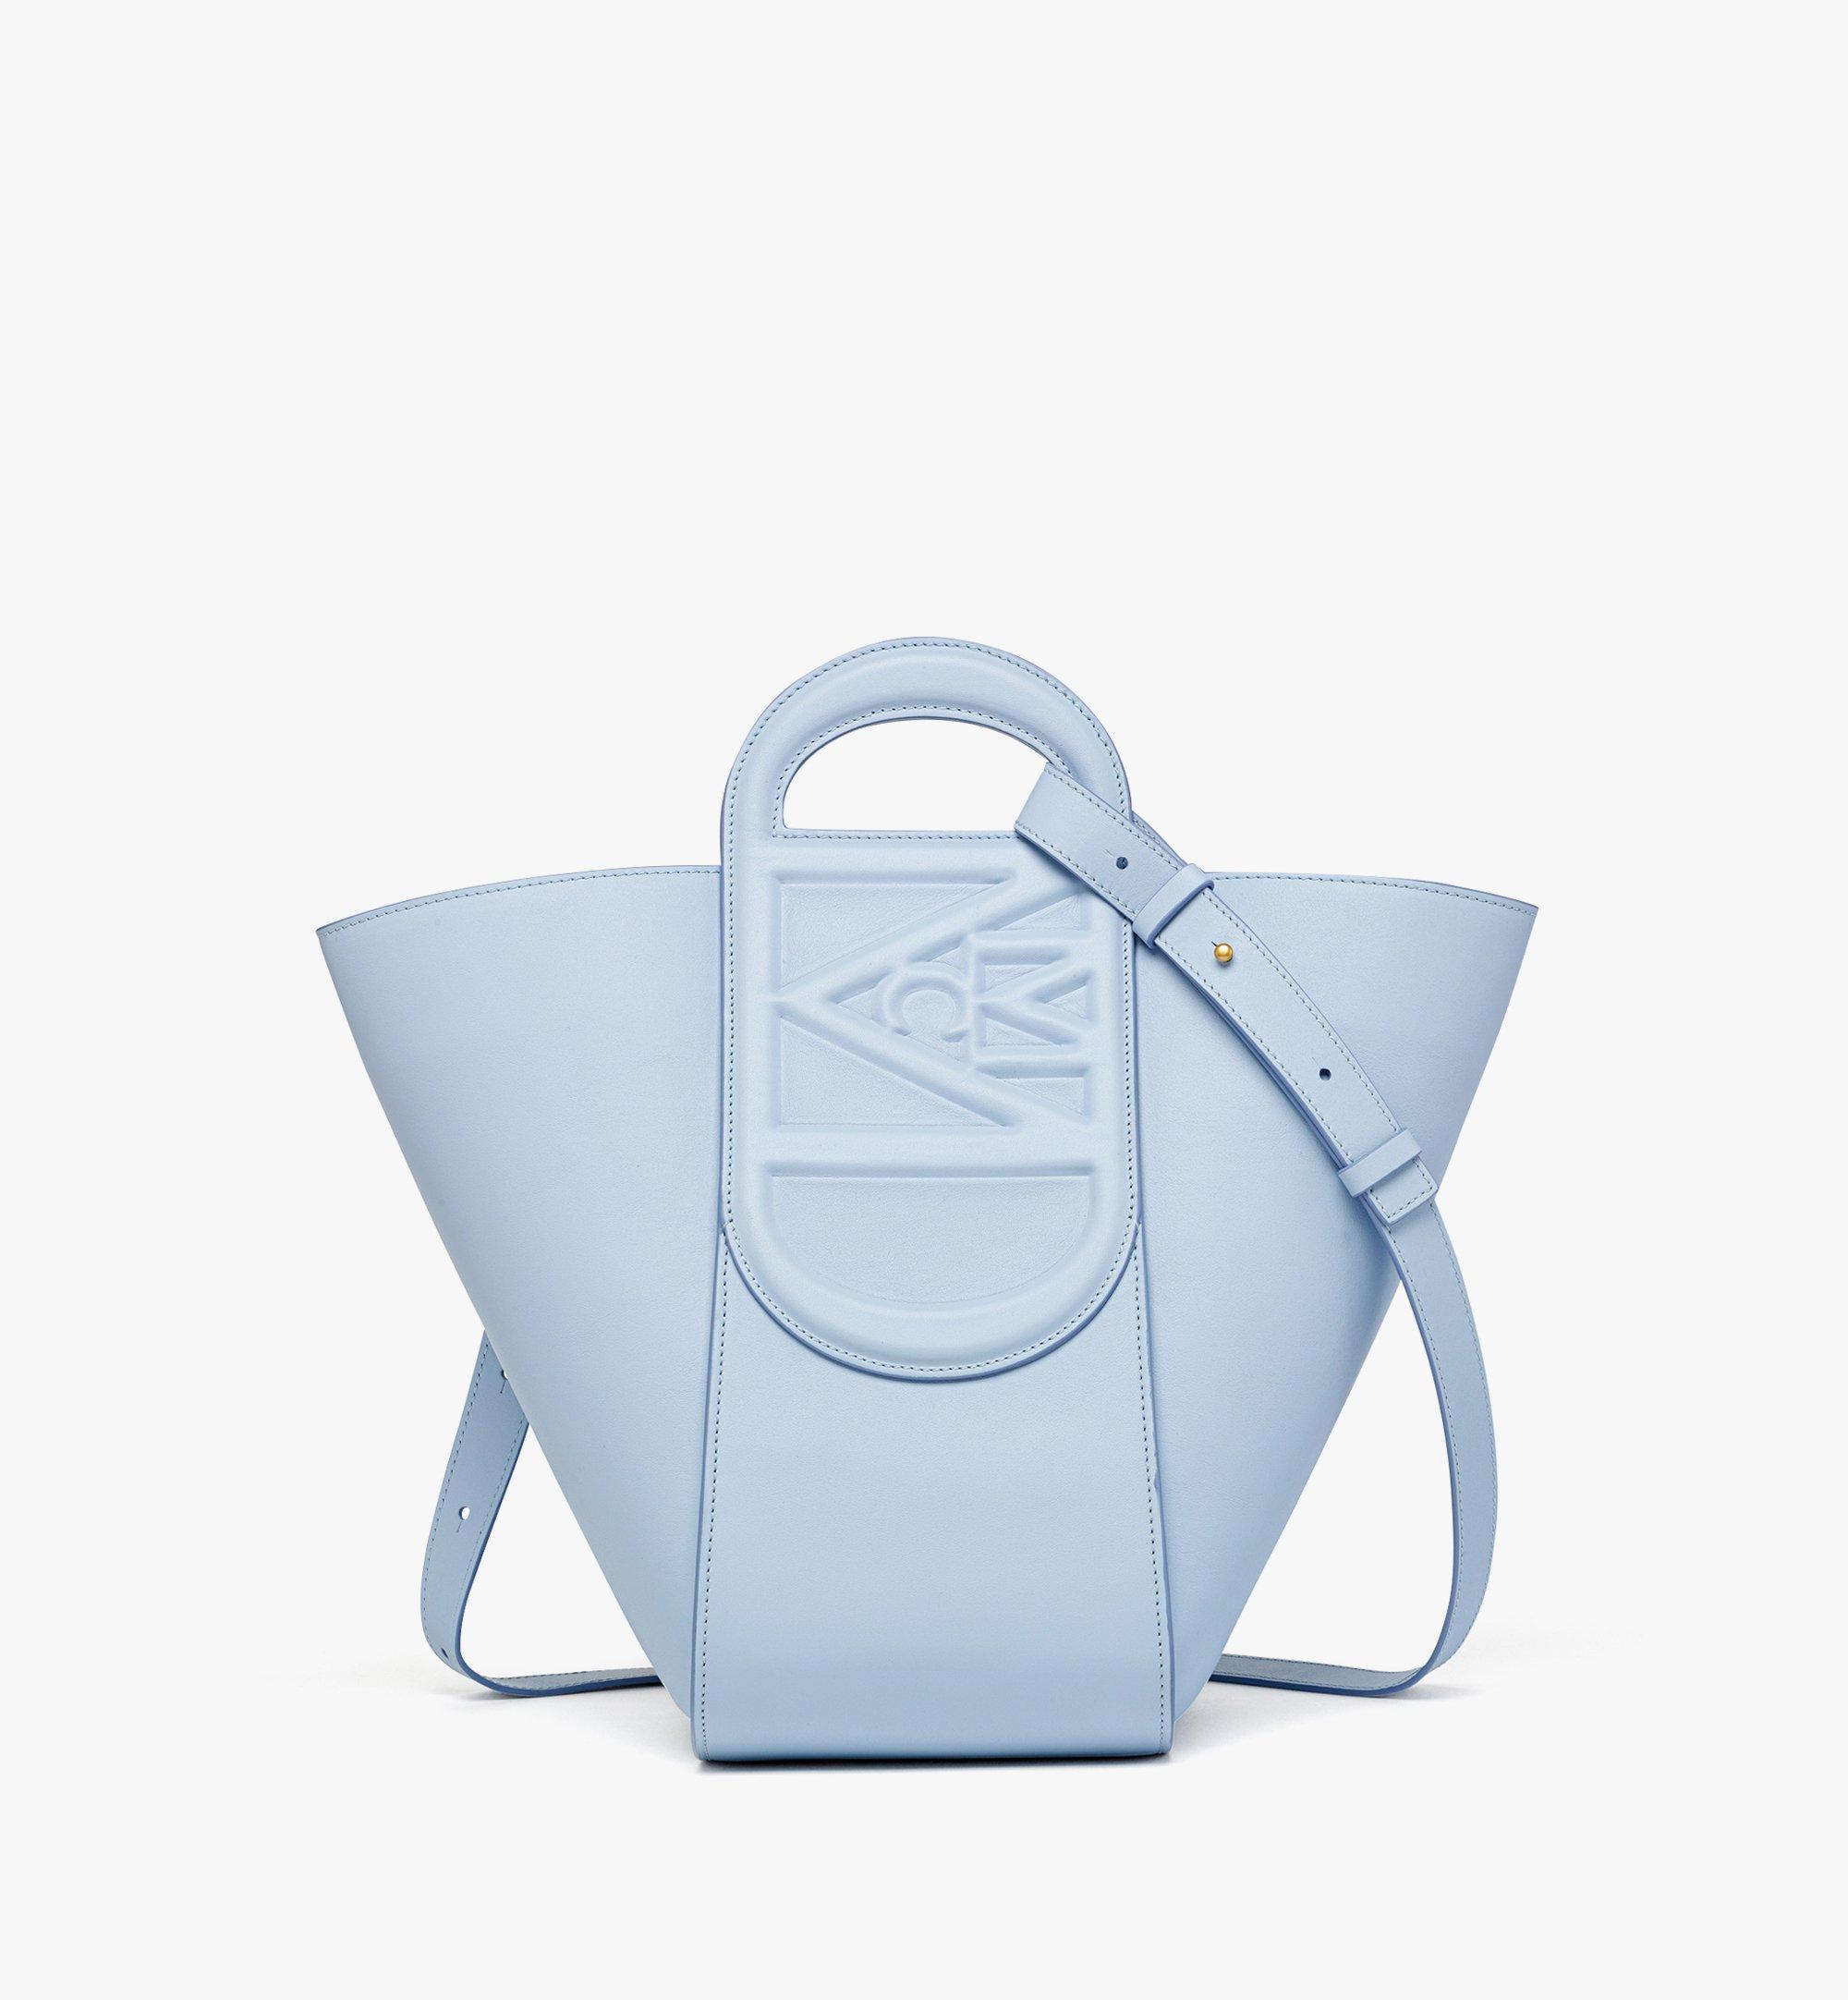 Large Mode Travia Tote in Spanish Nappa Leather Blue | MCM ®PT